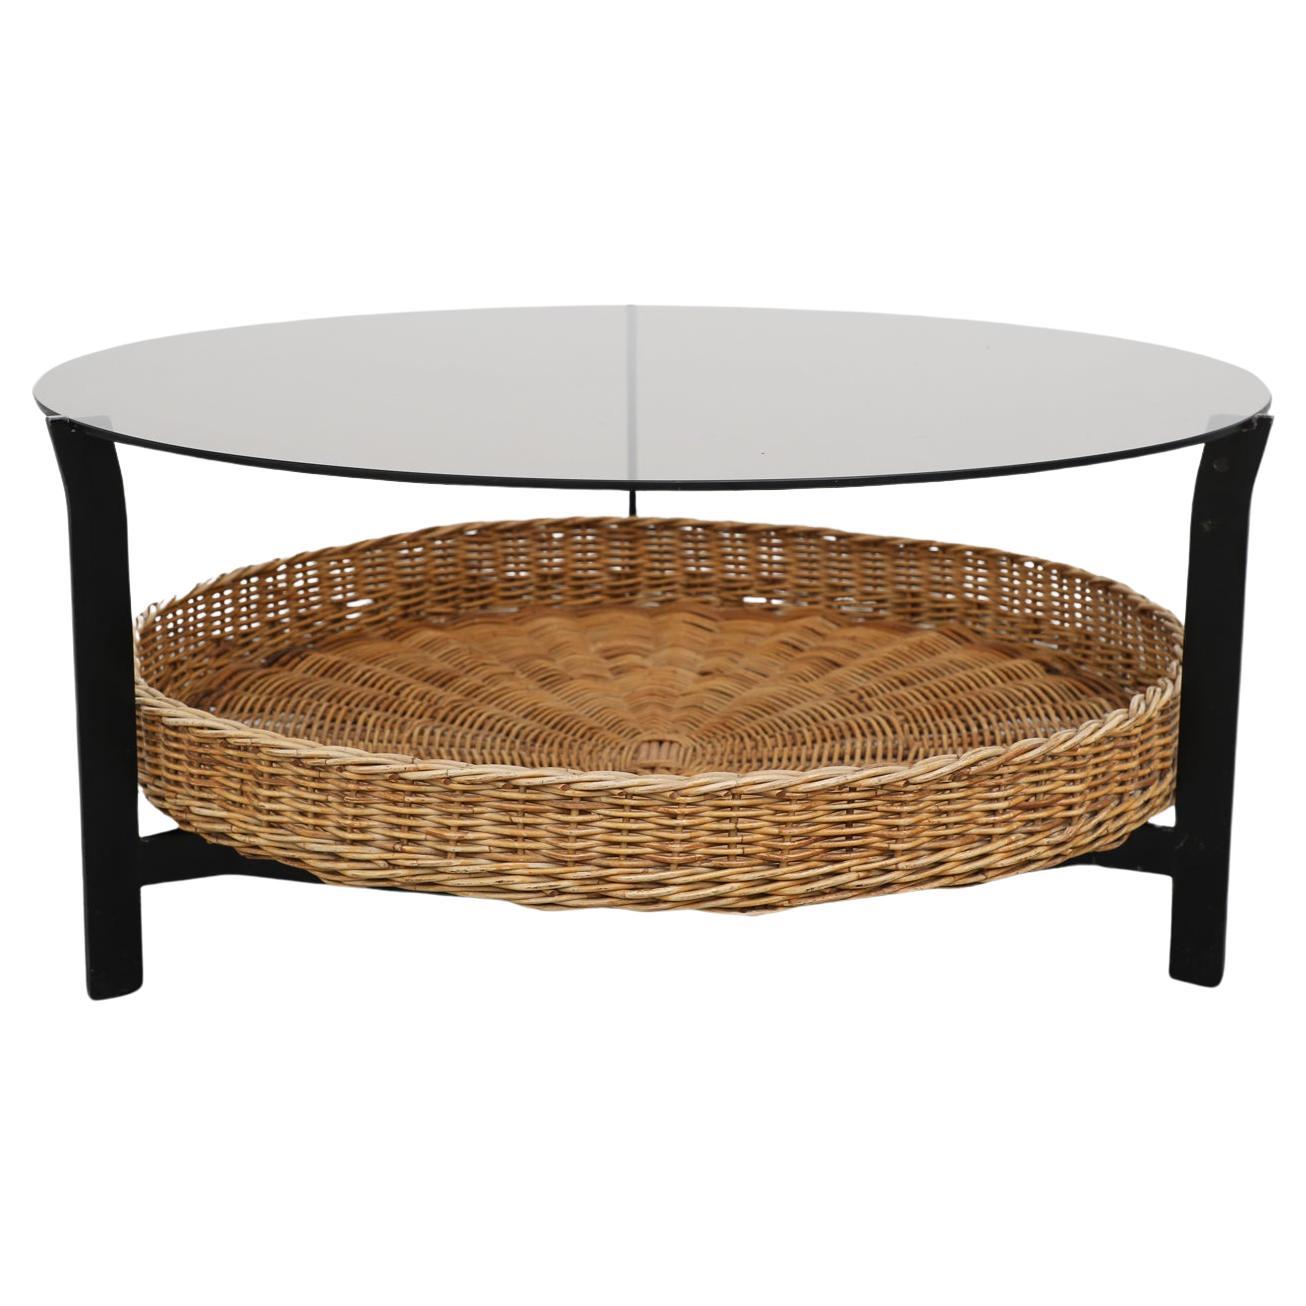 Mid-Century Round Modernist Coffee Table with Smoked Glass and Rattan Basket For Sale